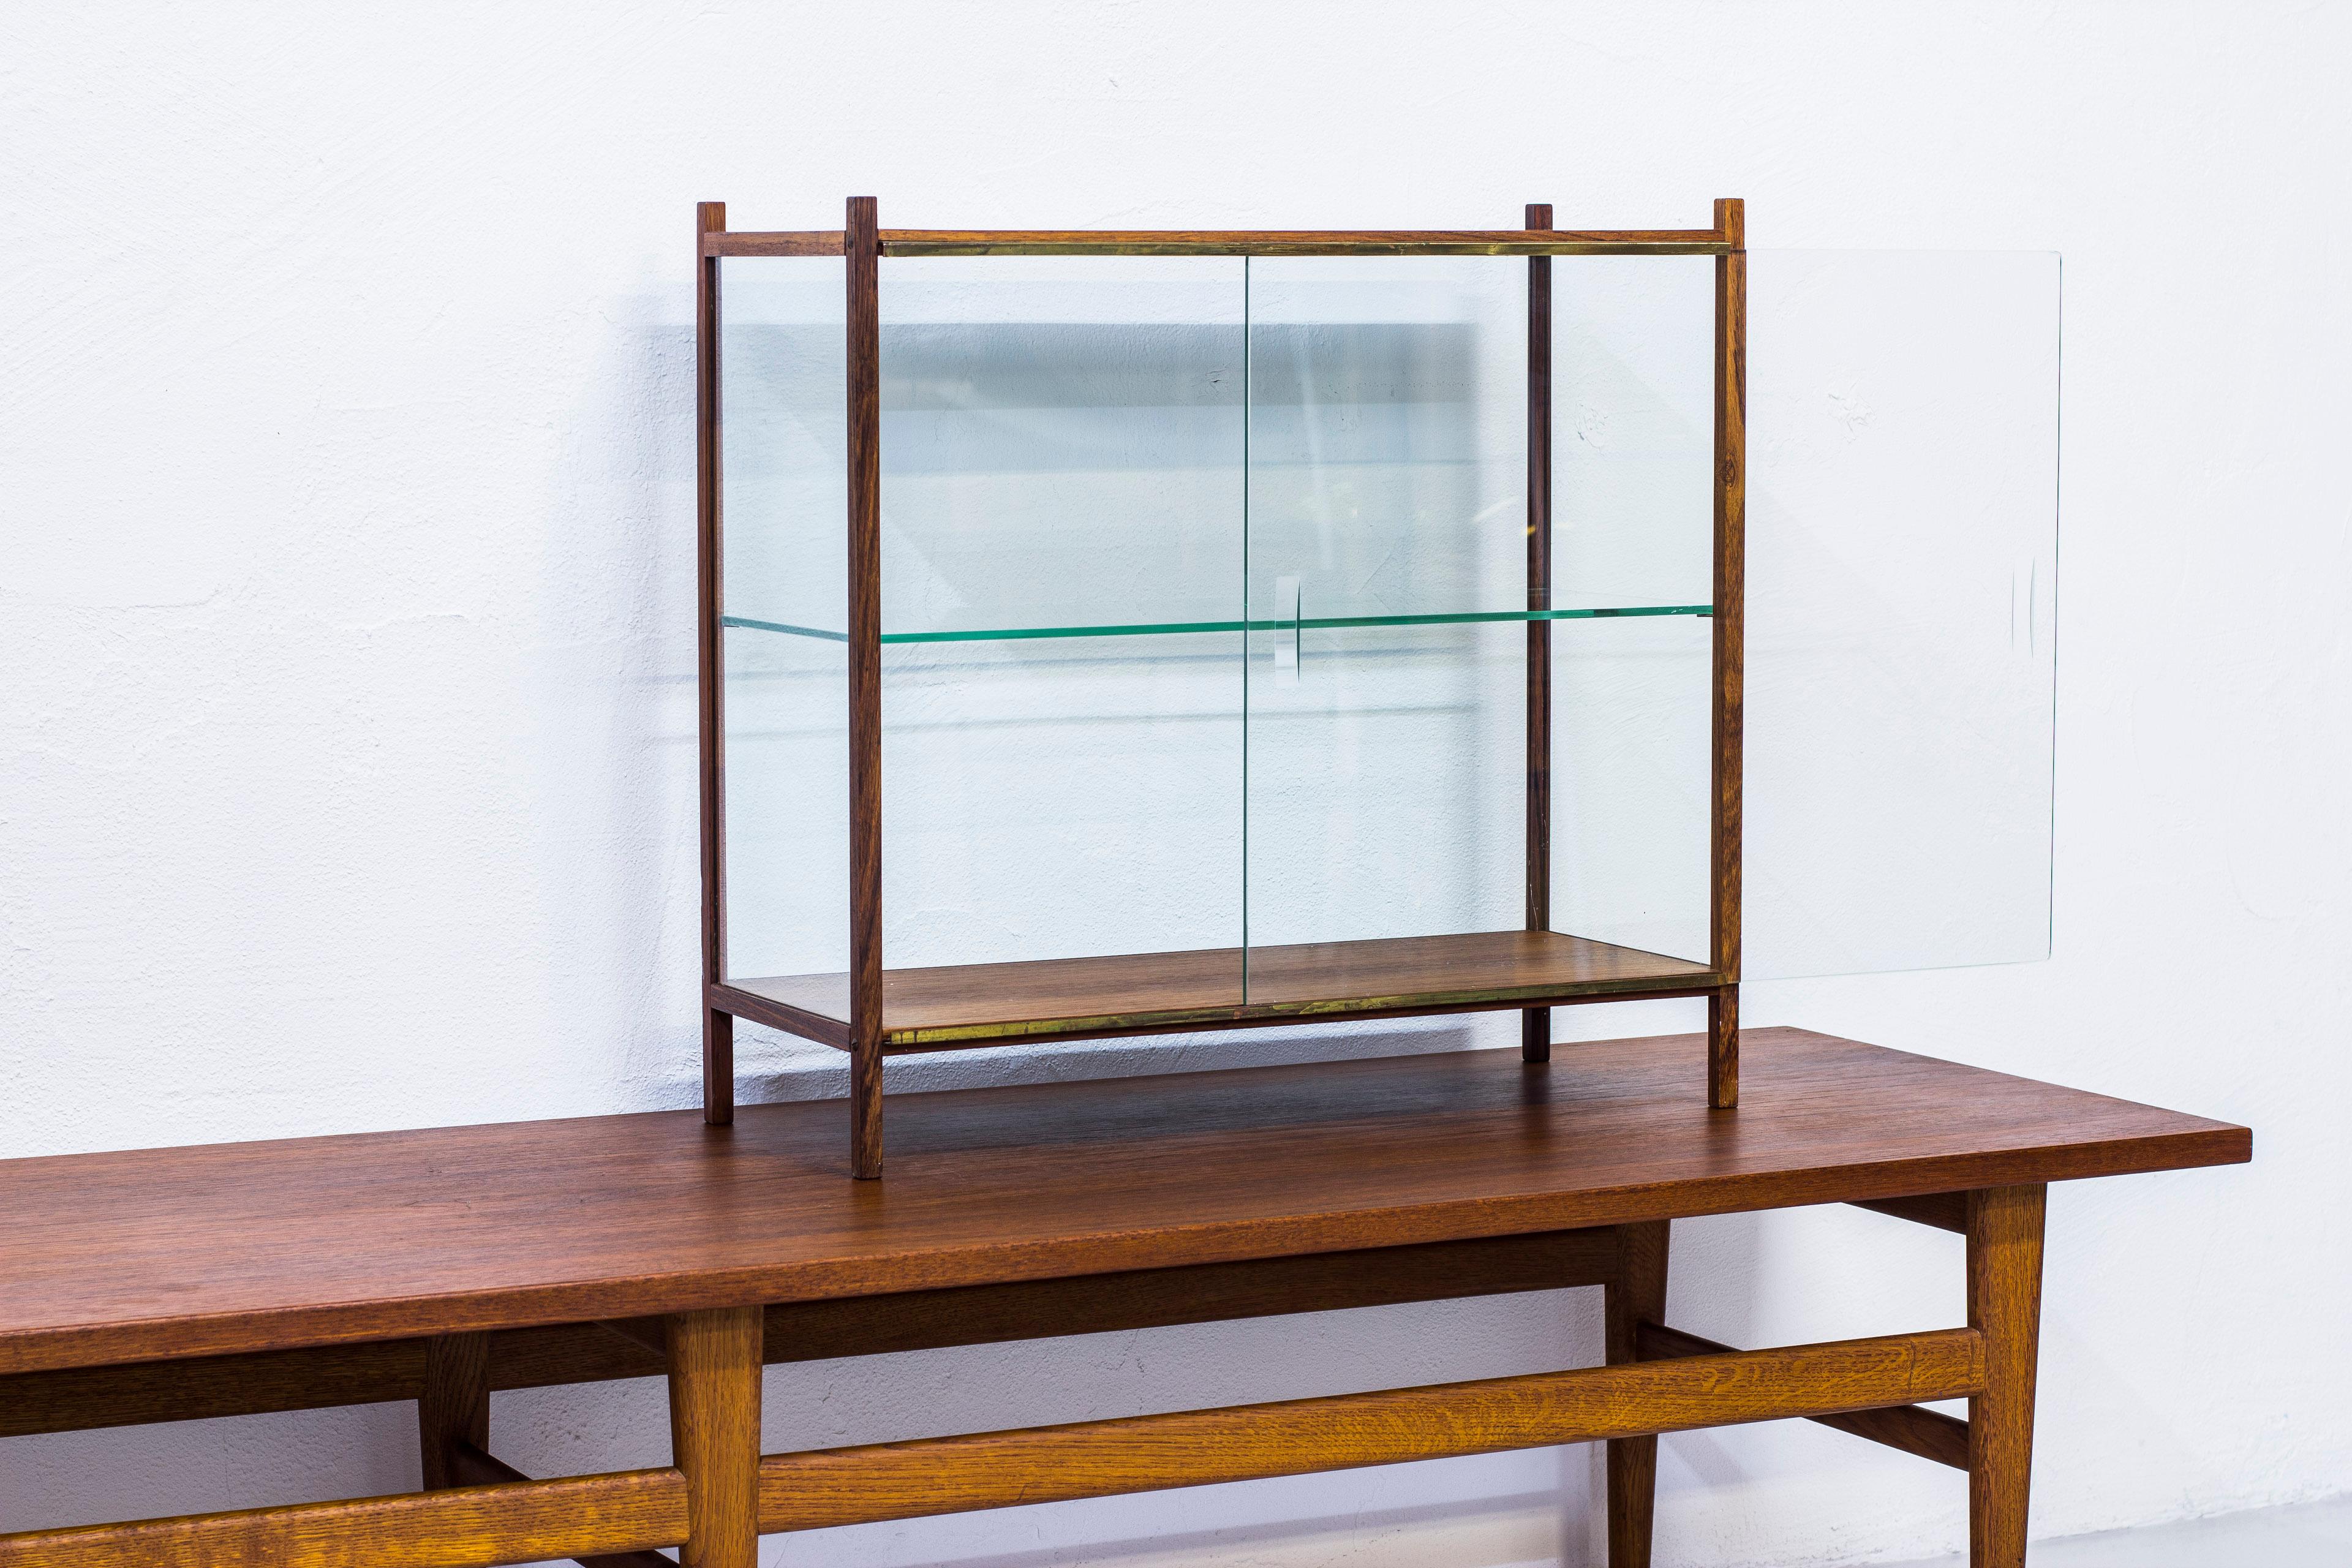 Small display cabinet or vitrine made in Sweden during the 1960s. Made from rosewood, glass and brass. Very good vintage condition with minor signs of usage and patina. Sliding door of glass with cut out handles. One optional glass shelf on the